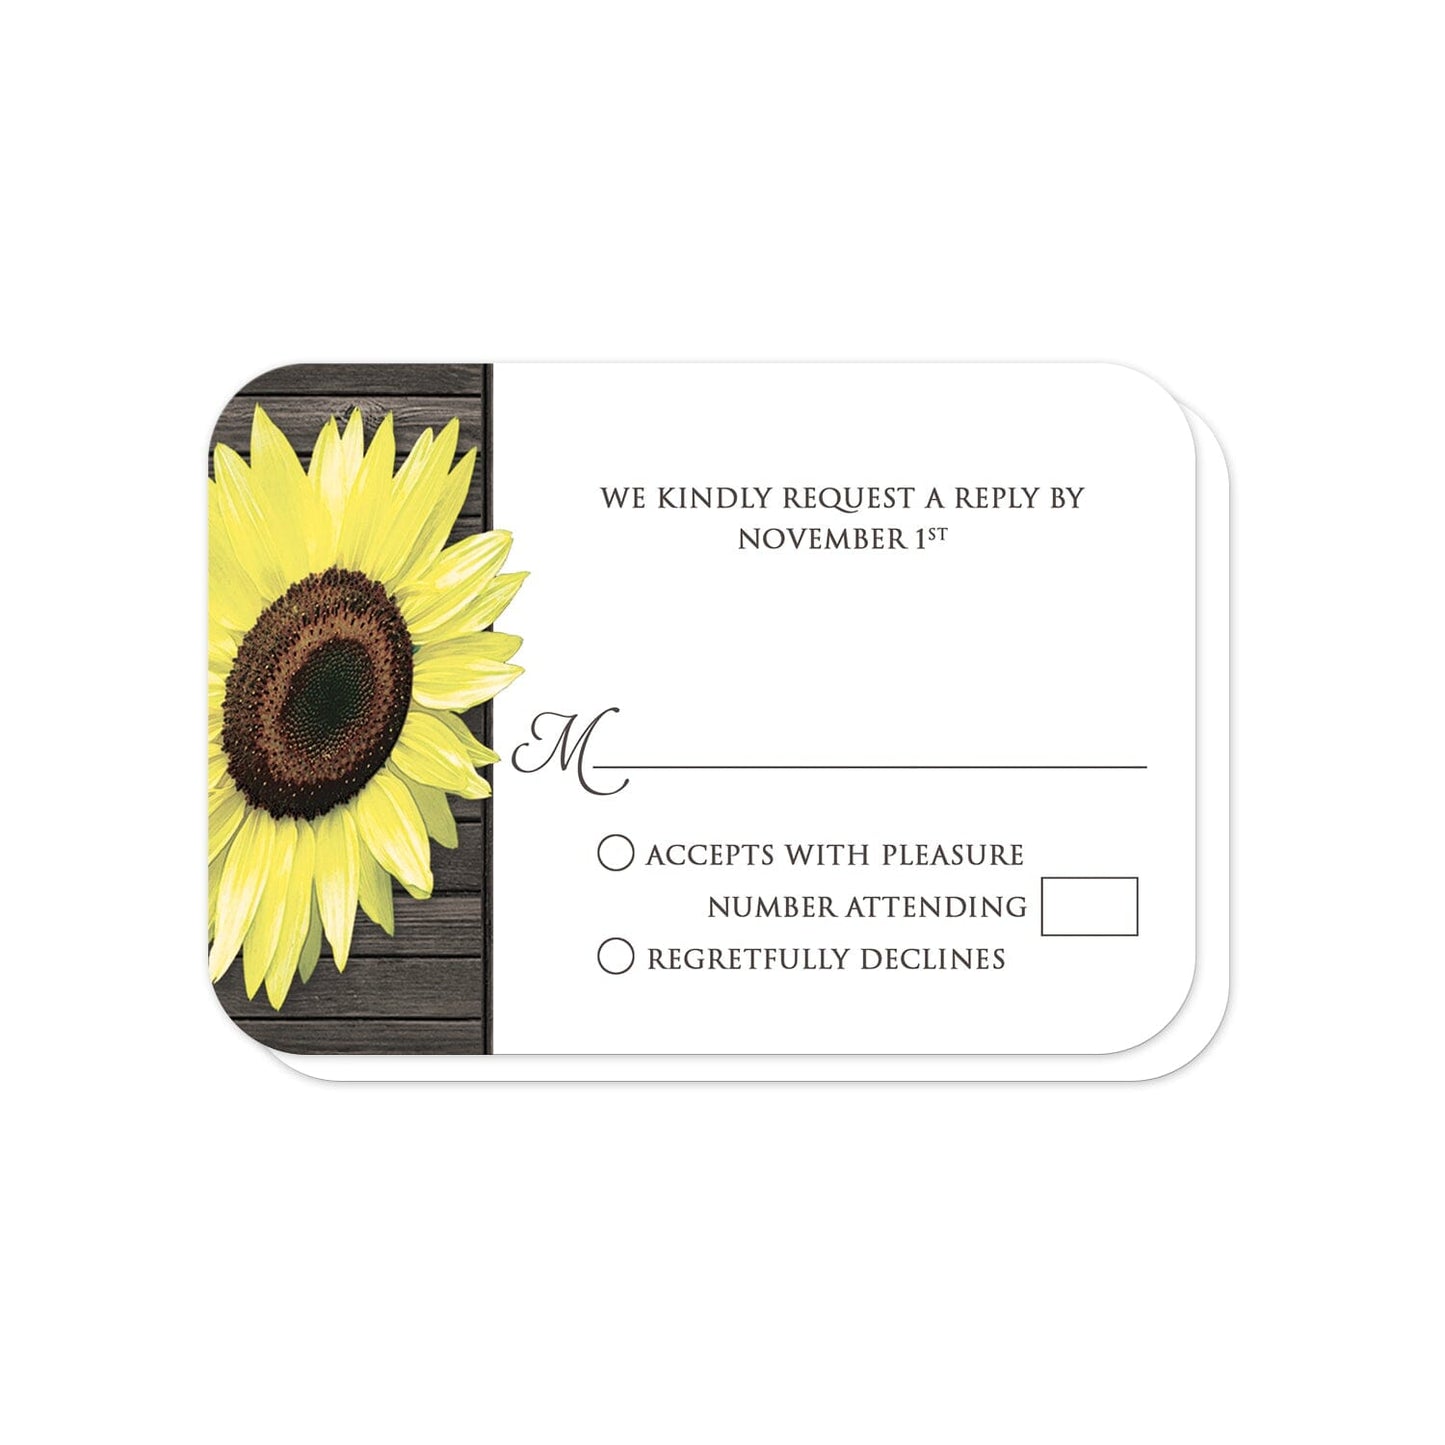 Rustic Sunflower Wood Mason Jar I Do BBQ RSVP Cards (with rounded corners) at Artistically Invited.